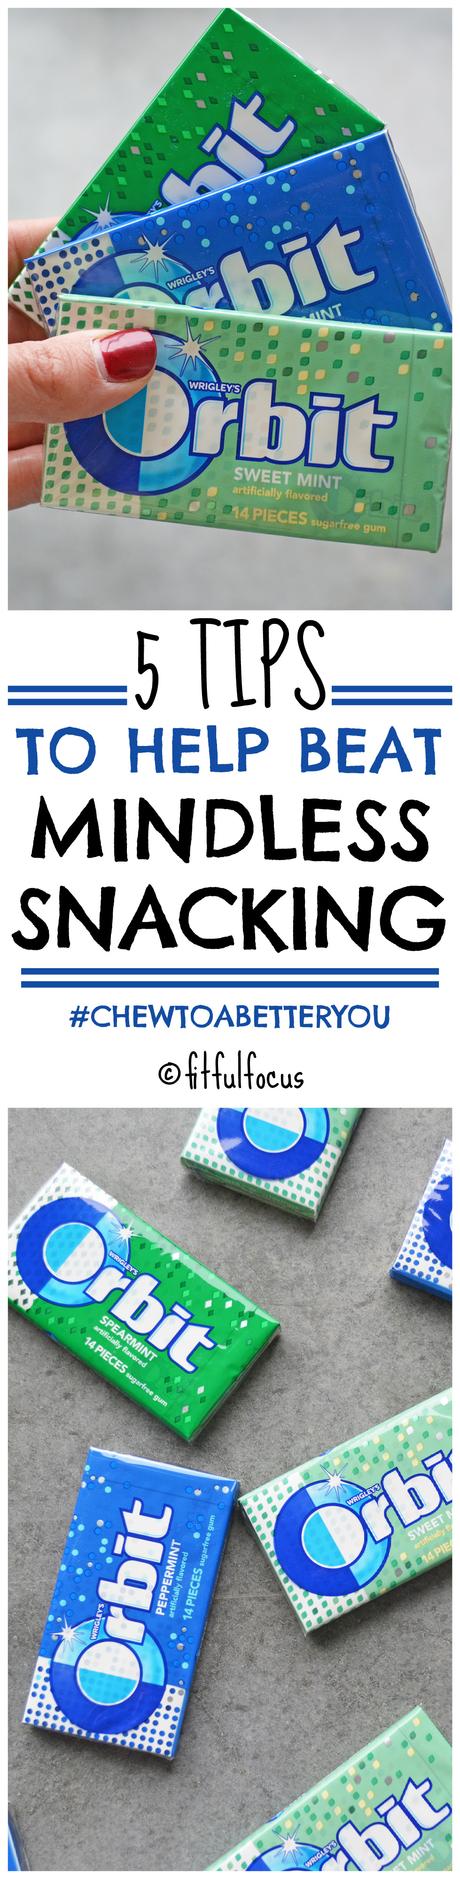 5 Tips To Help Beat Mindless Snacking